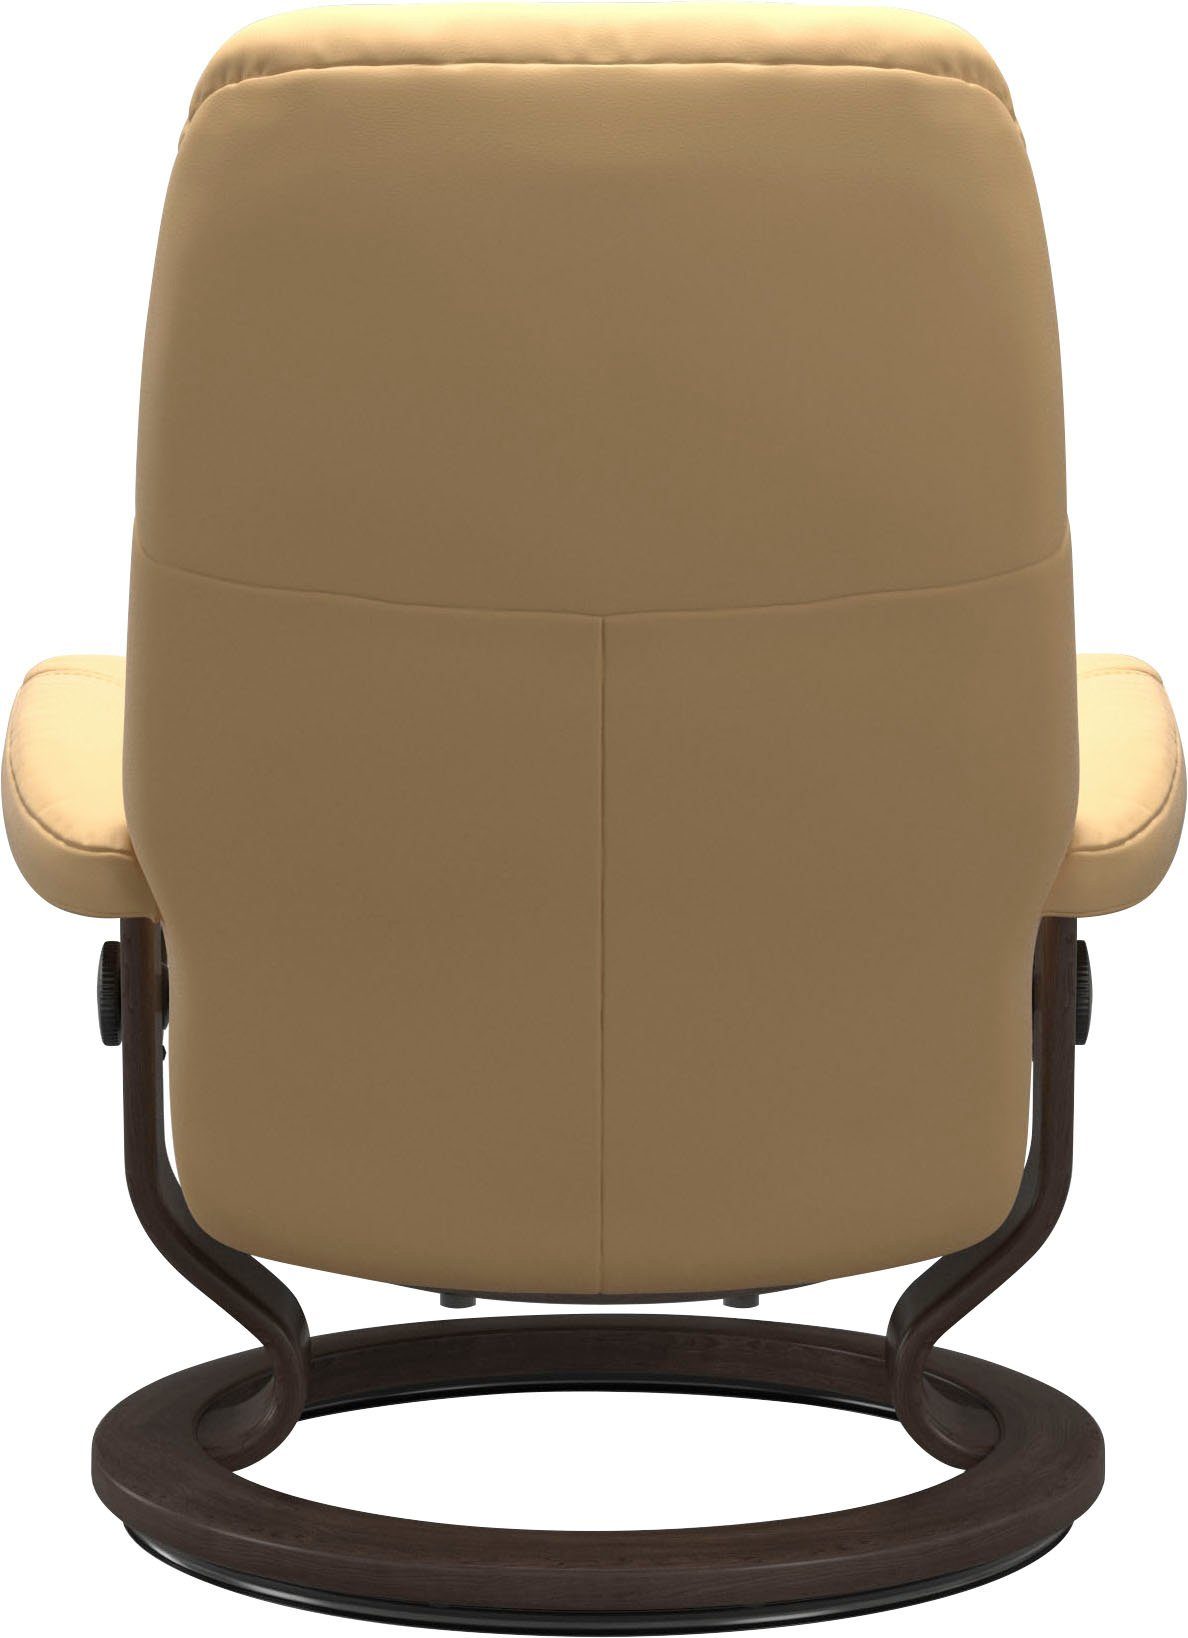 M, Consul, Gestell Größe mit Stressless® Base, Wenge Classic Relaxsessel